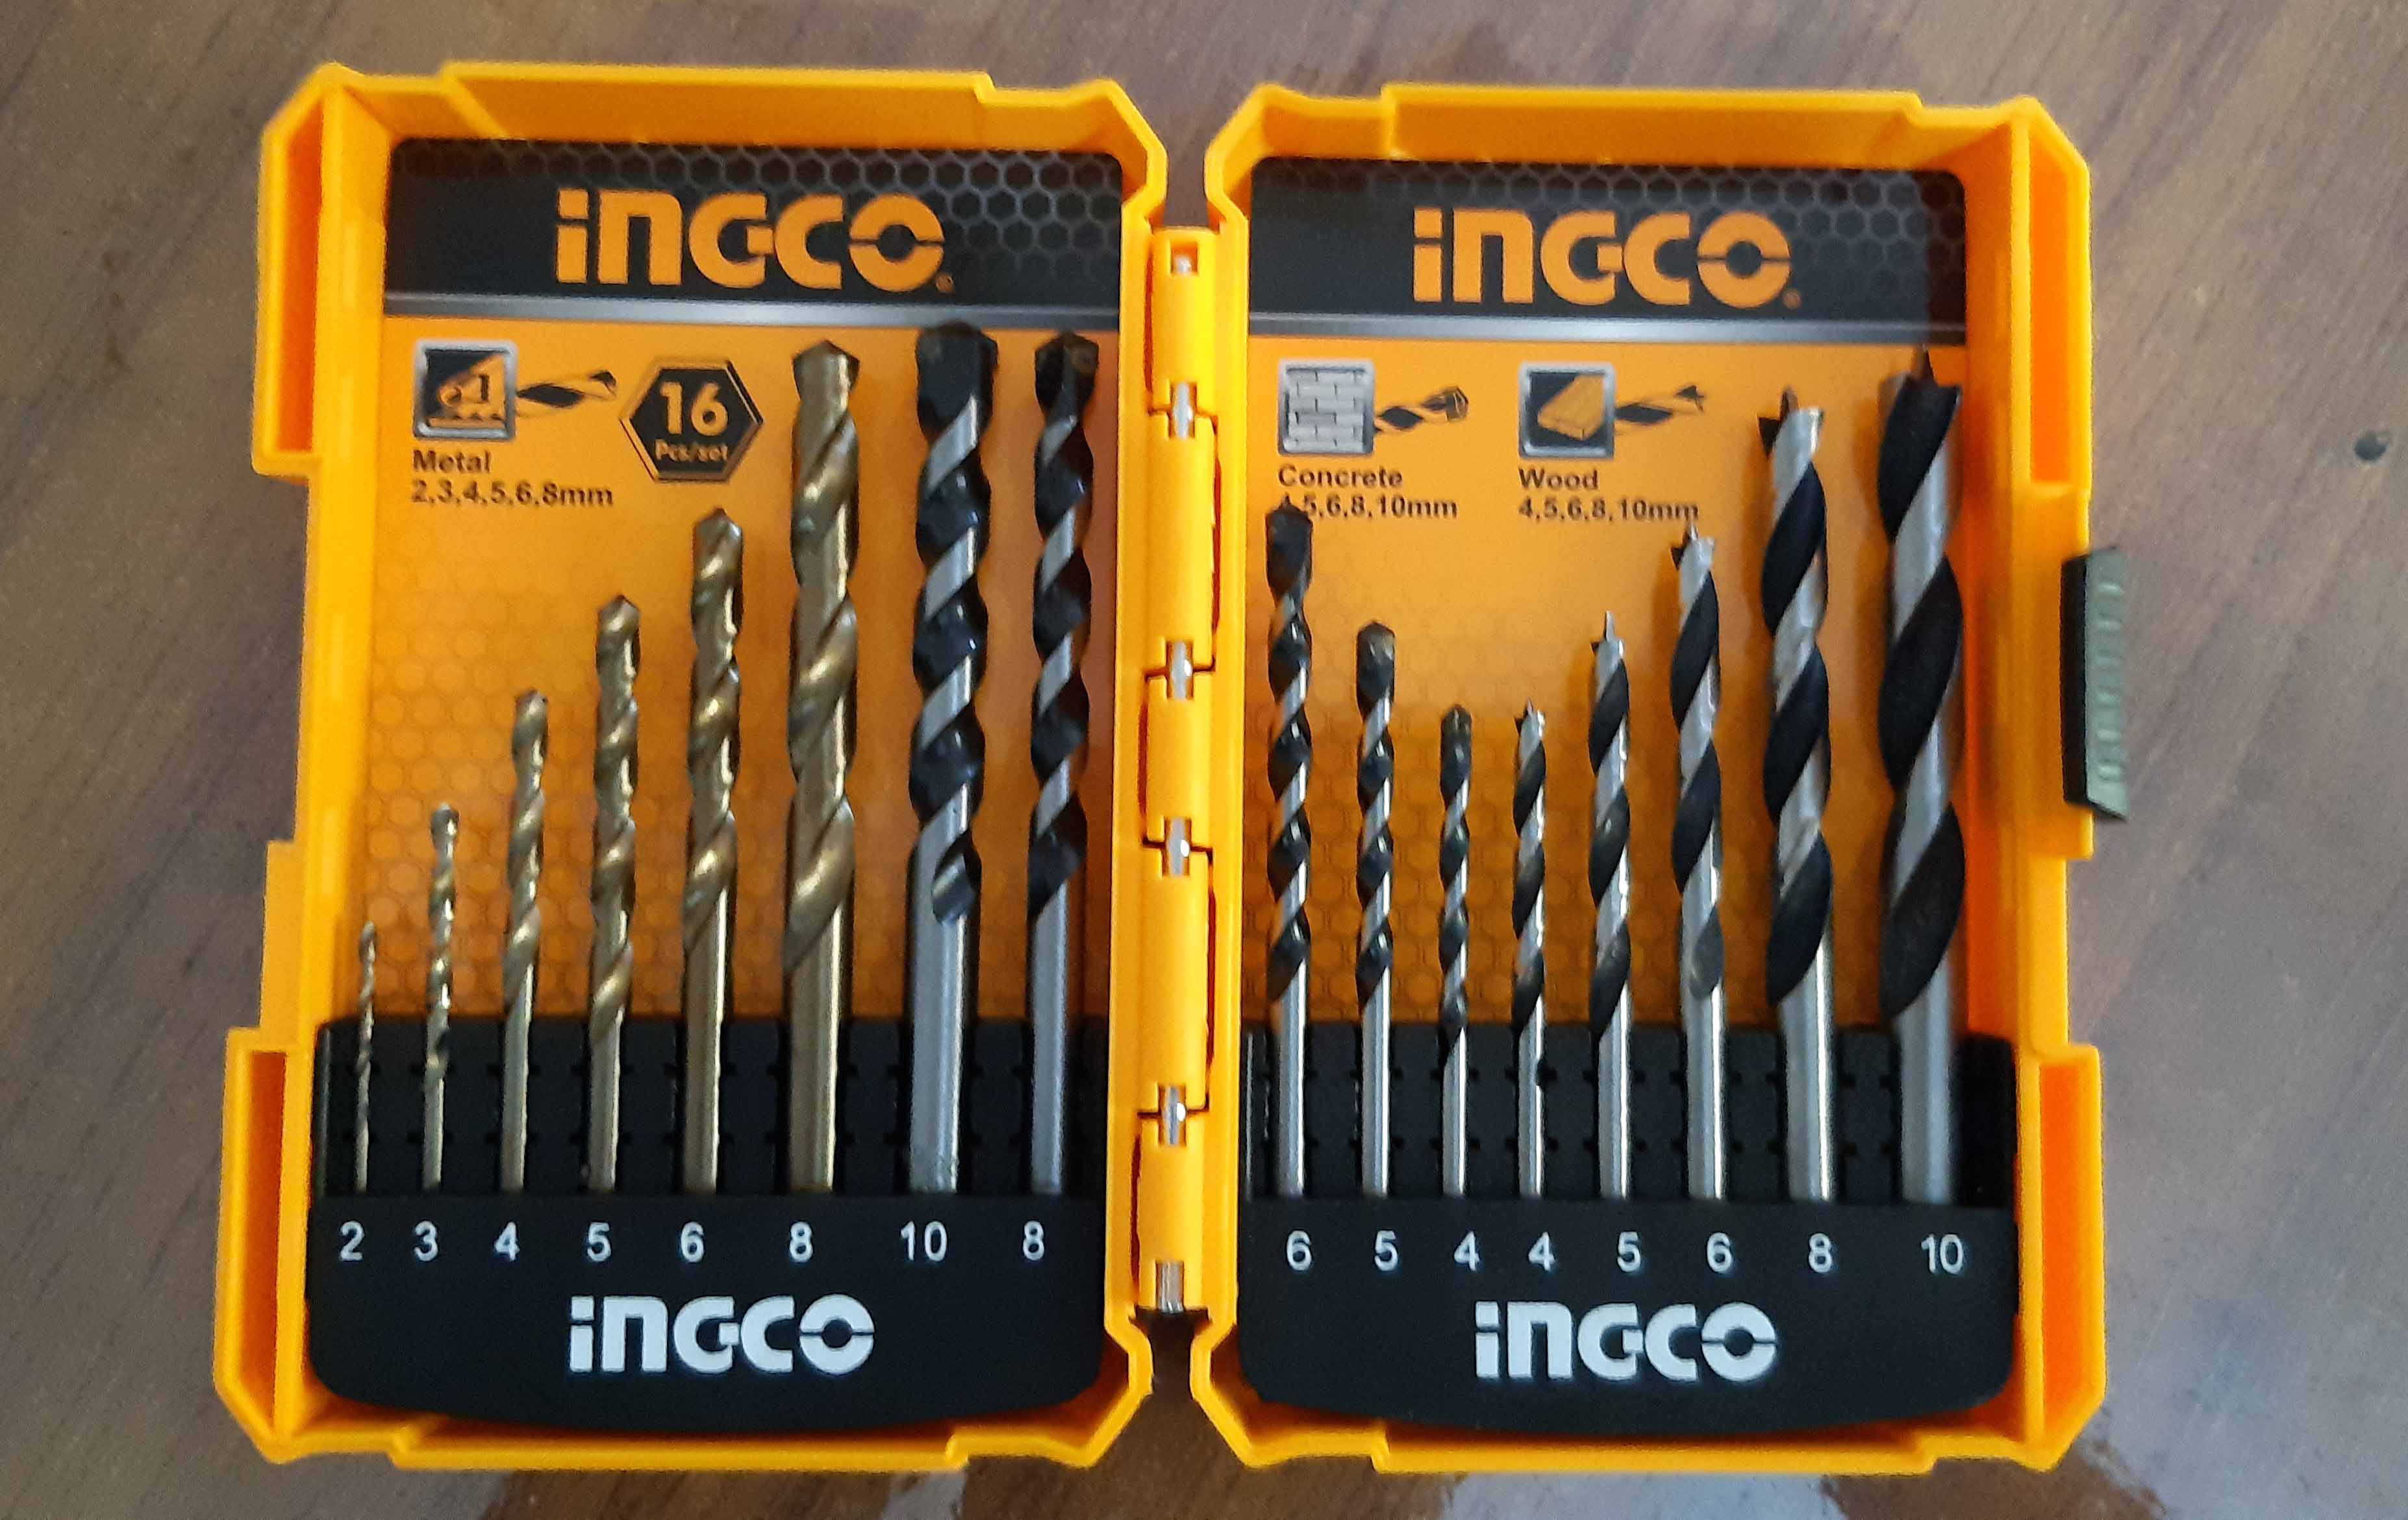 Ingco 16pcs Metal, Concrete And Wood Drill Bit Set - AKD9165 | Supply Master | Accra, Ghana Drill Bits Buy Tools hardware Building materials